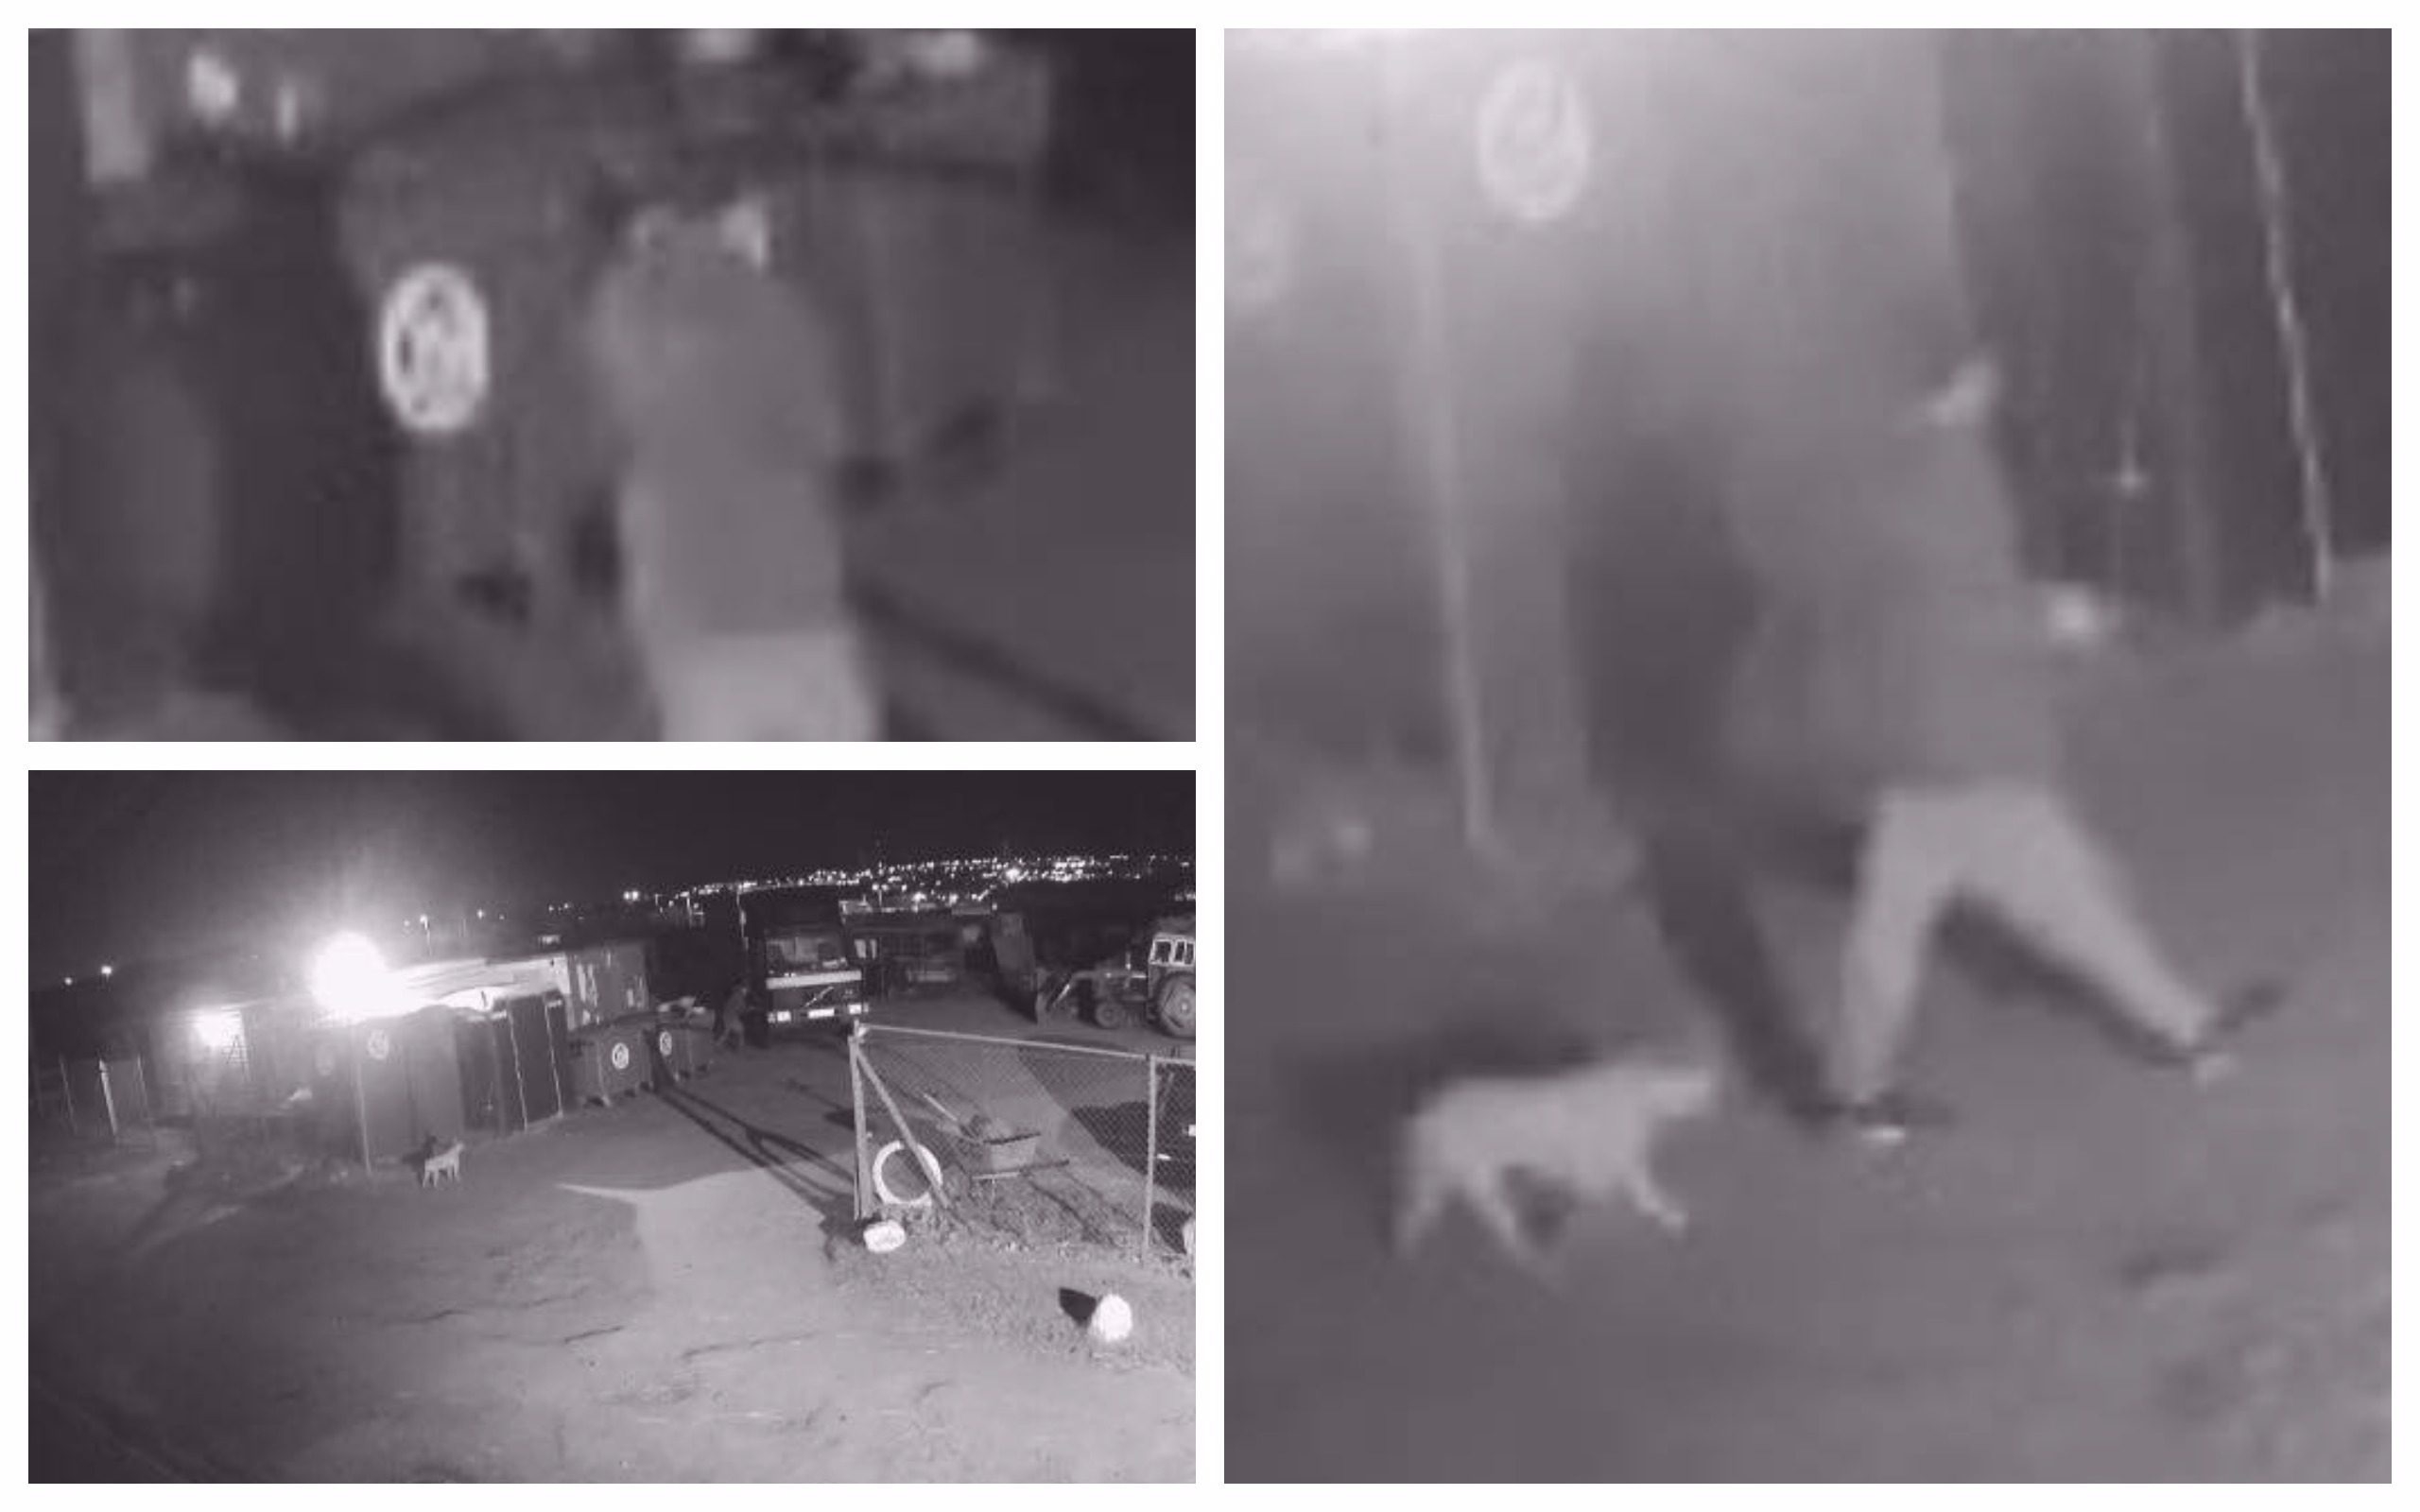 Stills from CCTV showing someone suspected of trying to release horses at Claverhouse Equestrian.